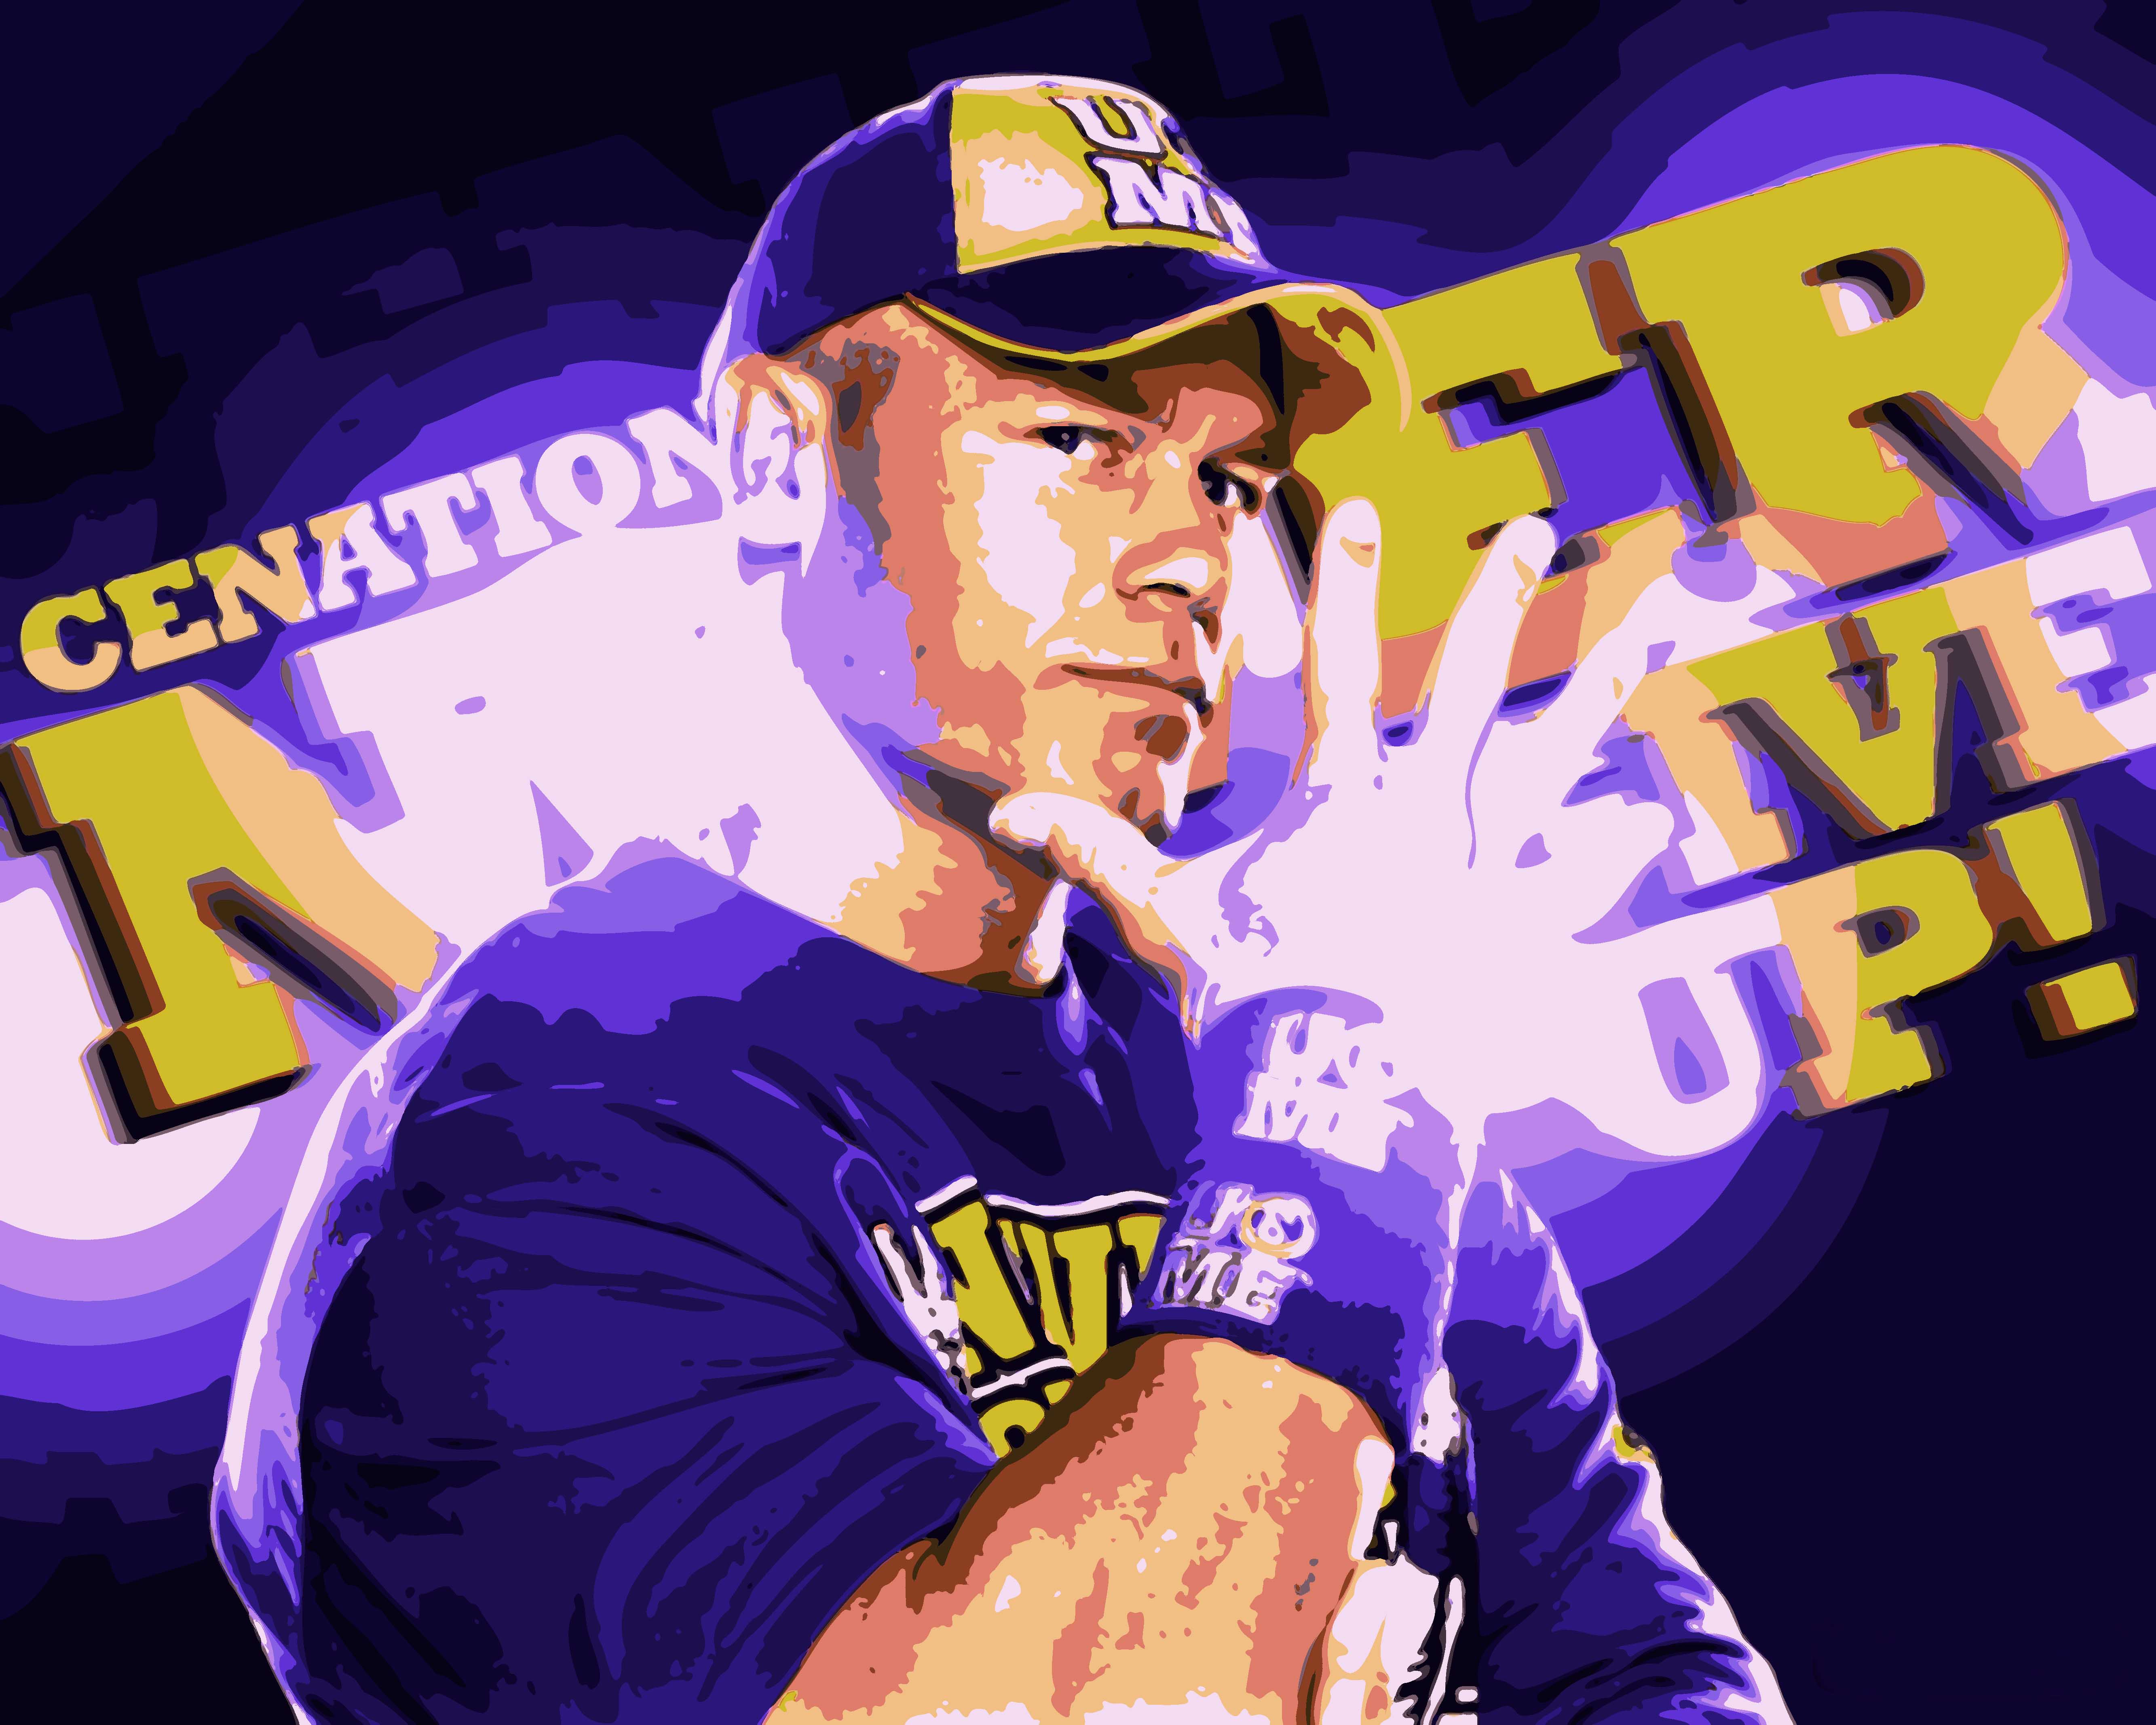 Is John Cena a top 10 superstar of all time?